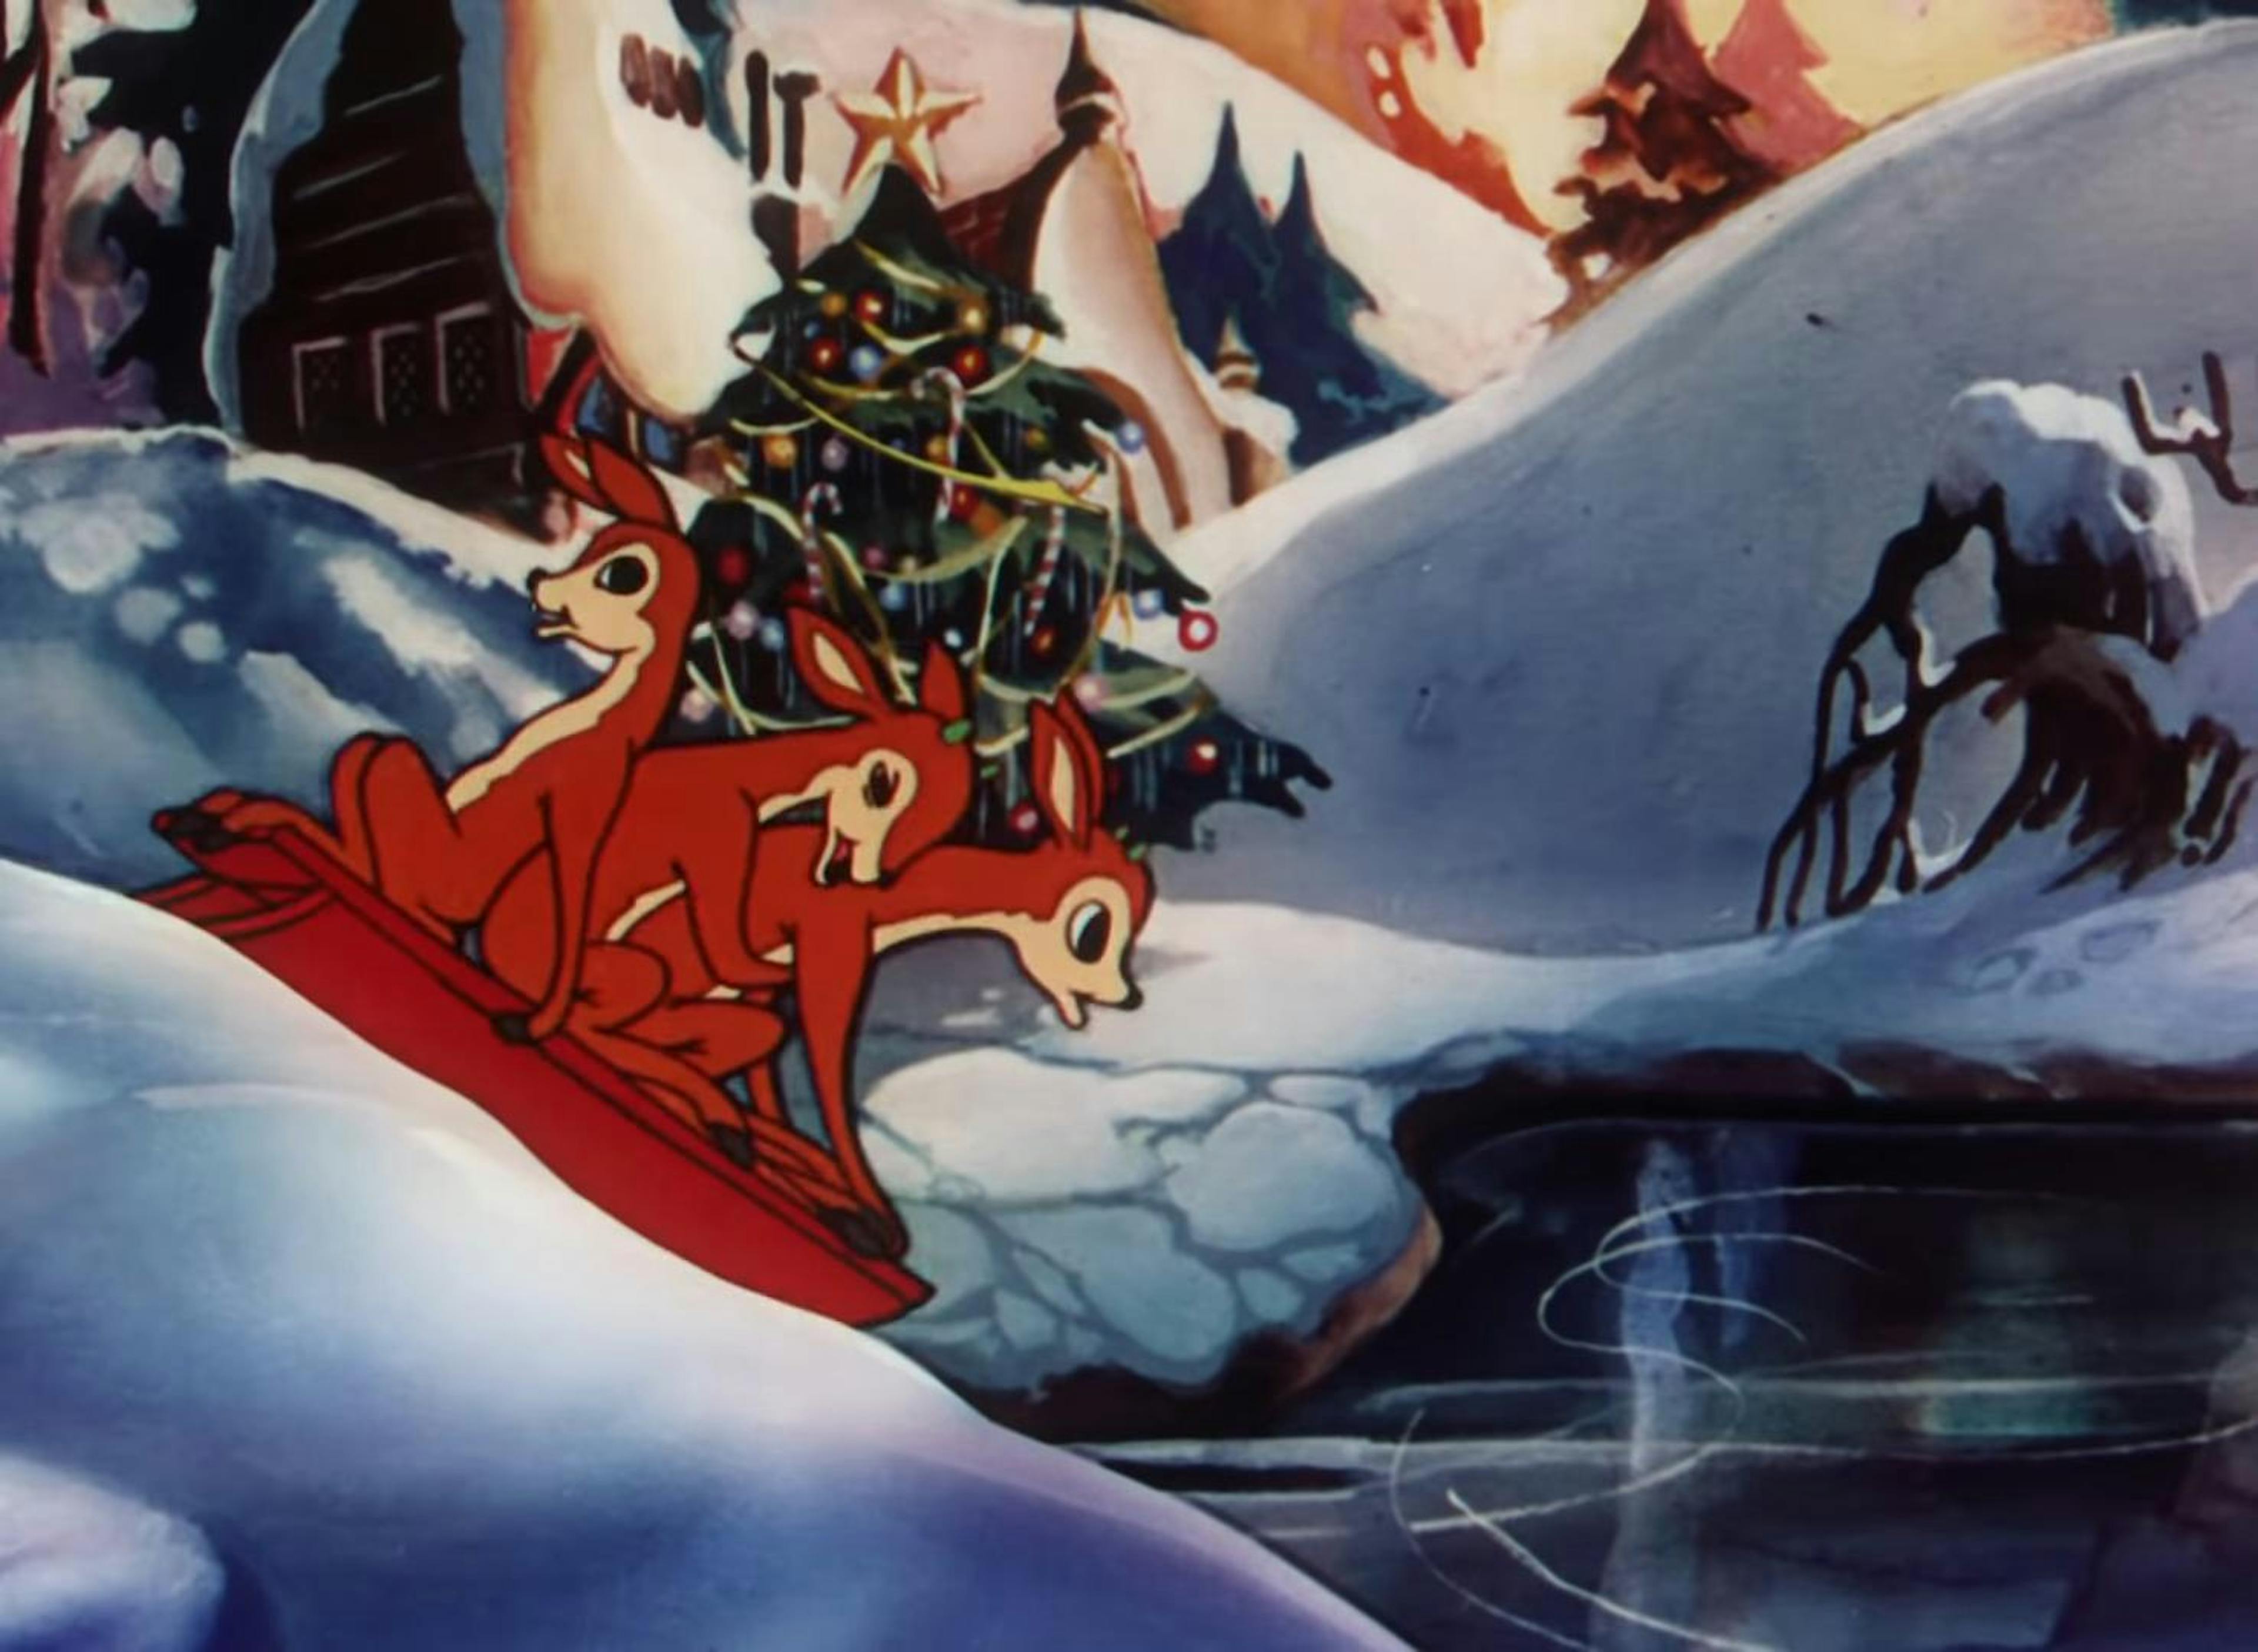 Three reindeer ride a sled towards a frozen pond, with Christmas trees and snow drifts in the background